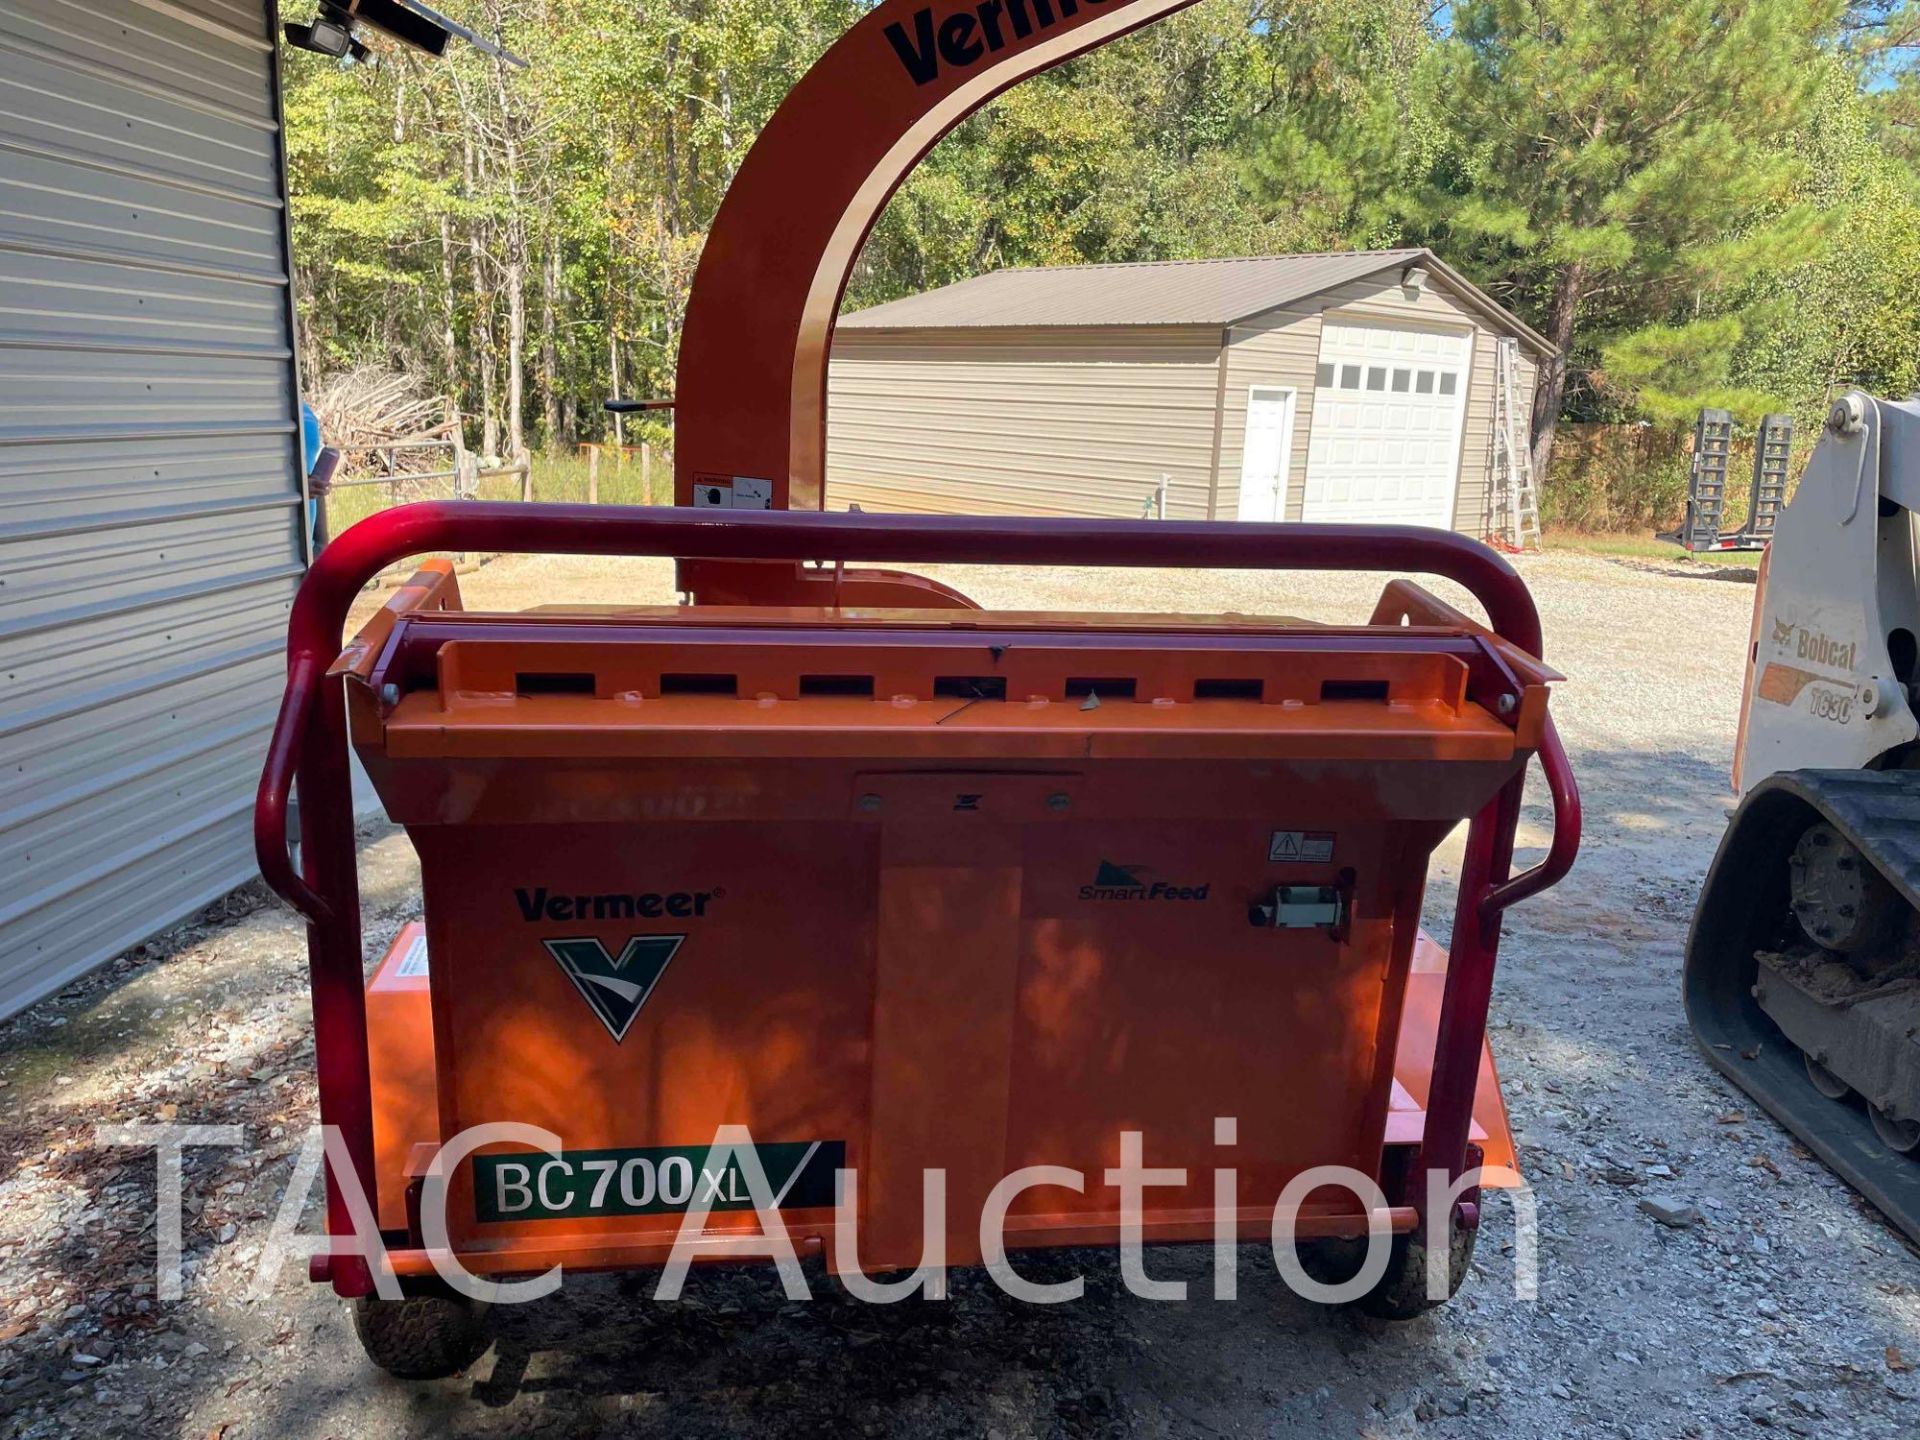 2022 Vermeer BC700XL Towable Brush Chipper - Image 3 of 15